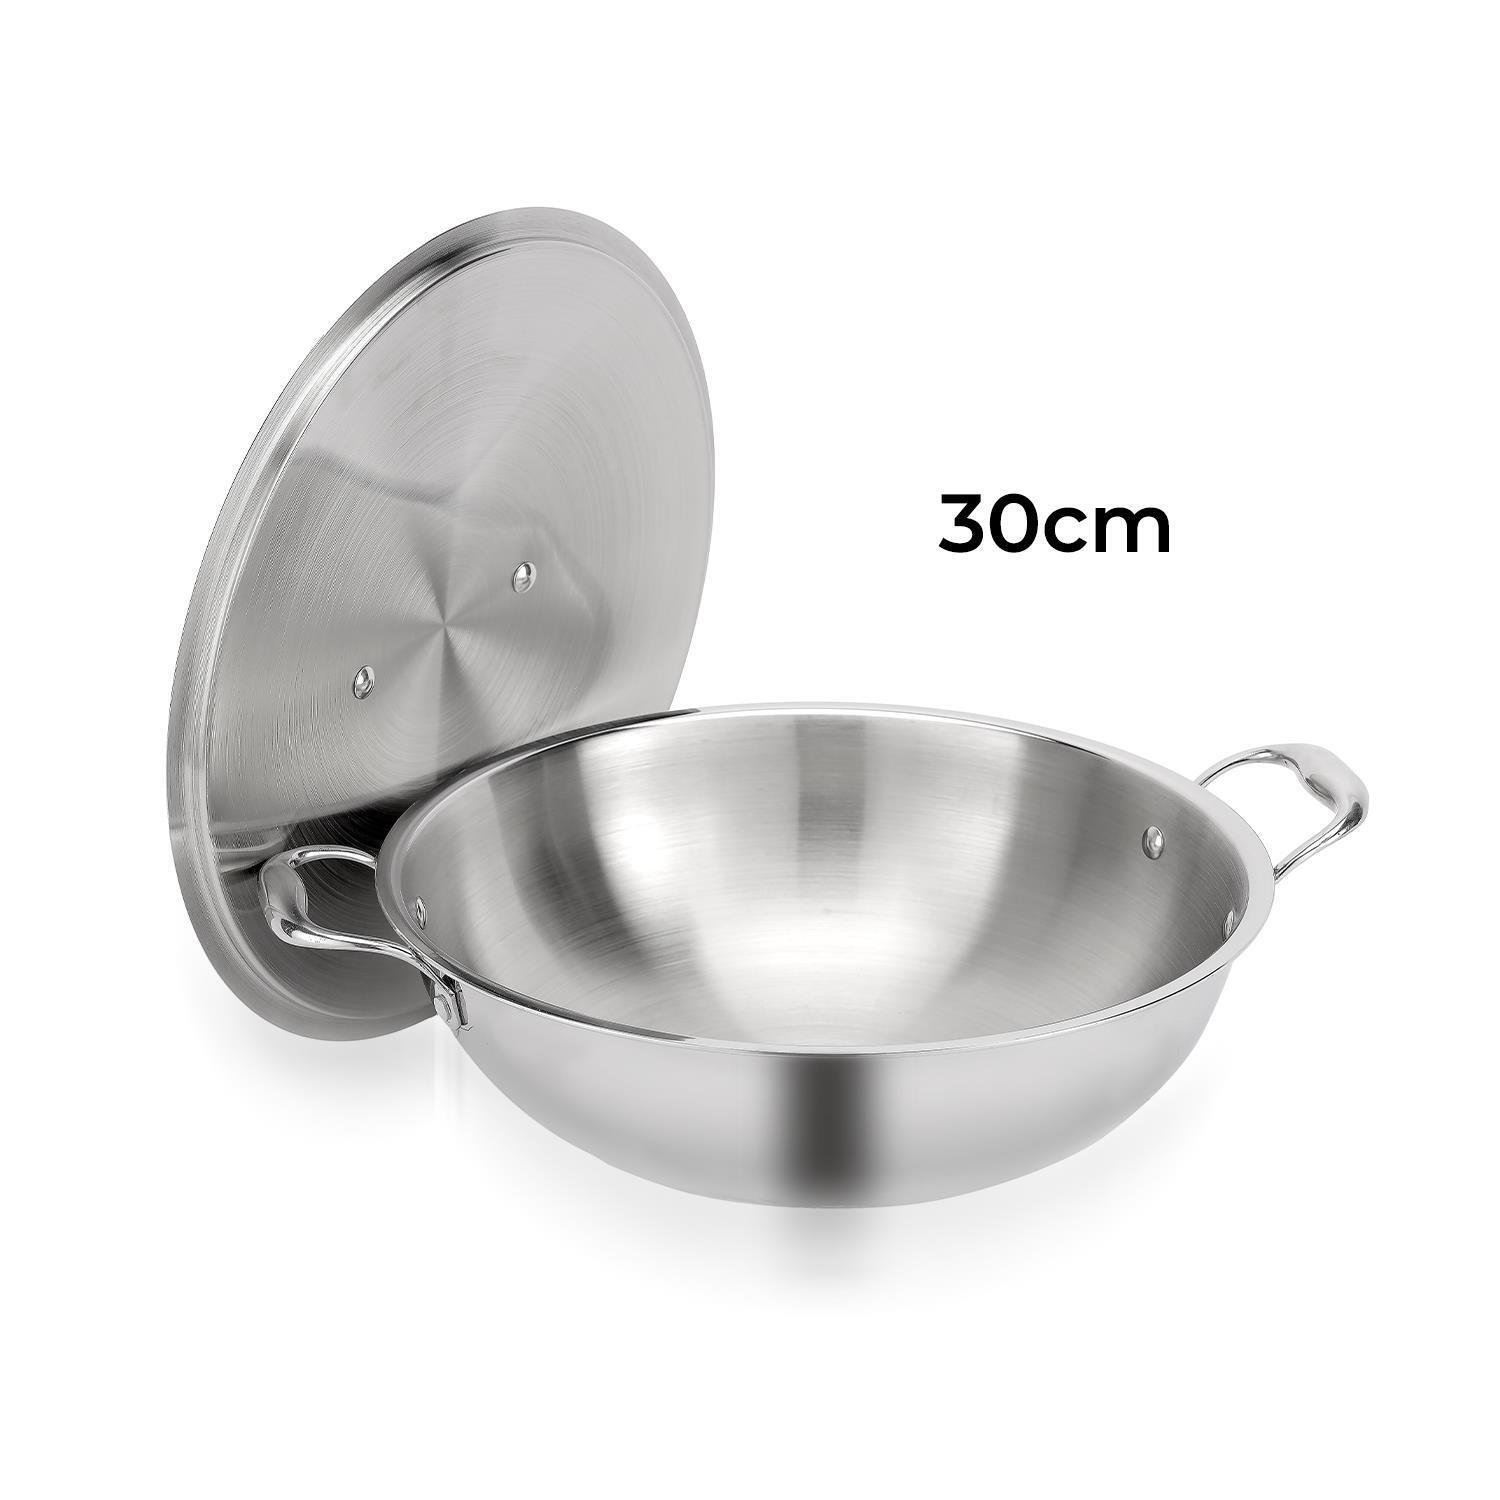 30cm Triply Heavy-Duty Stainless Steel Wok Pan With Lid